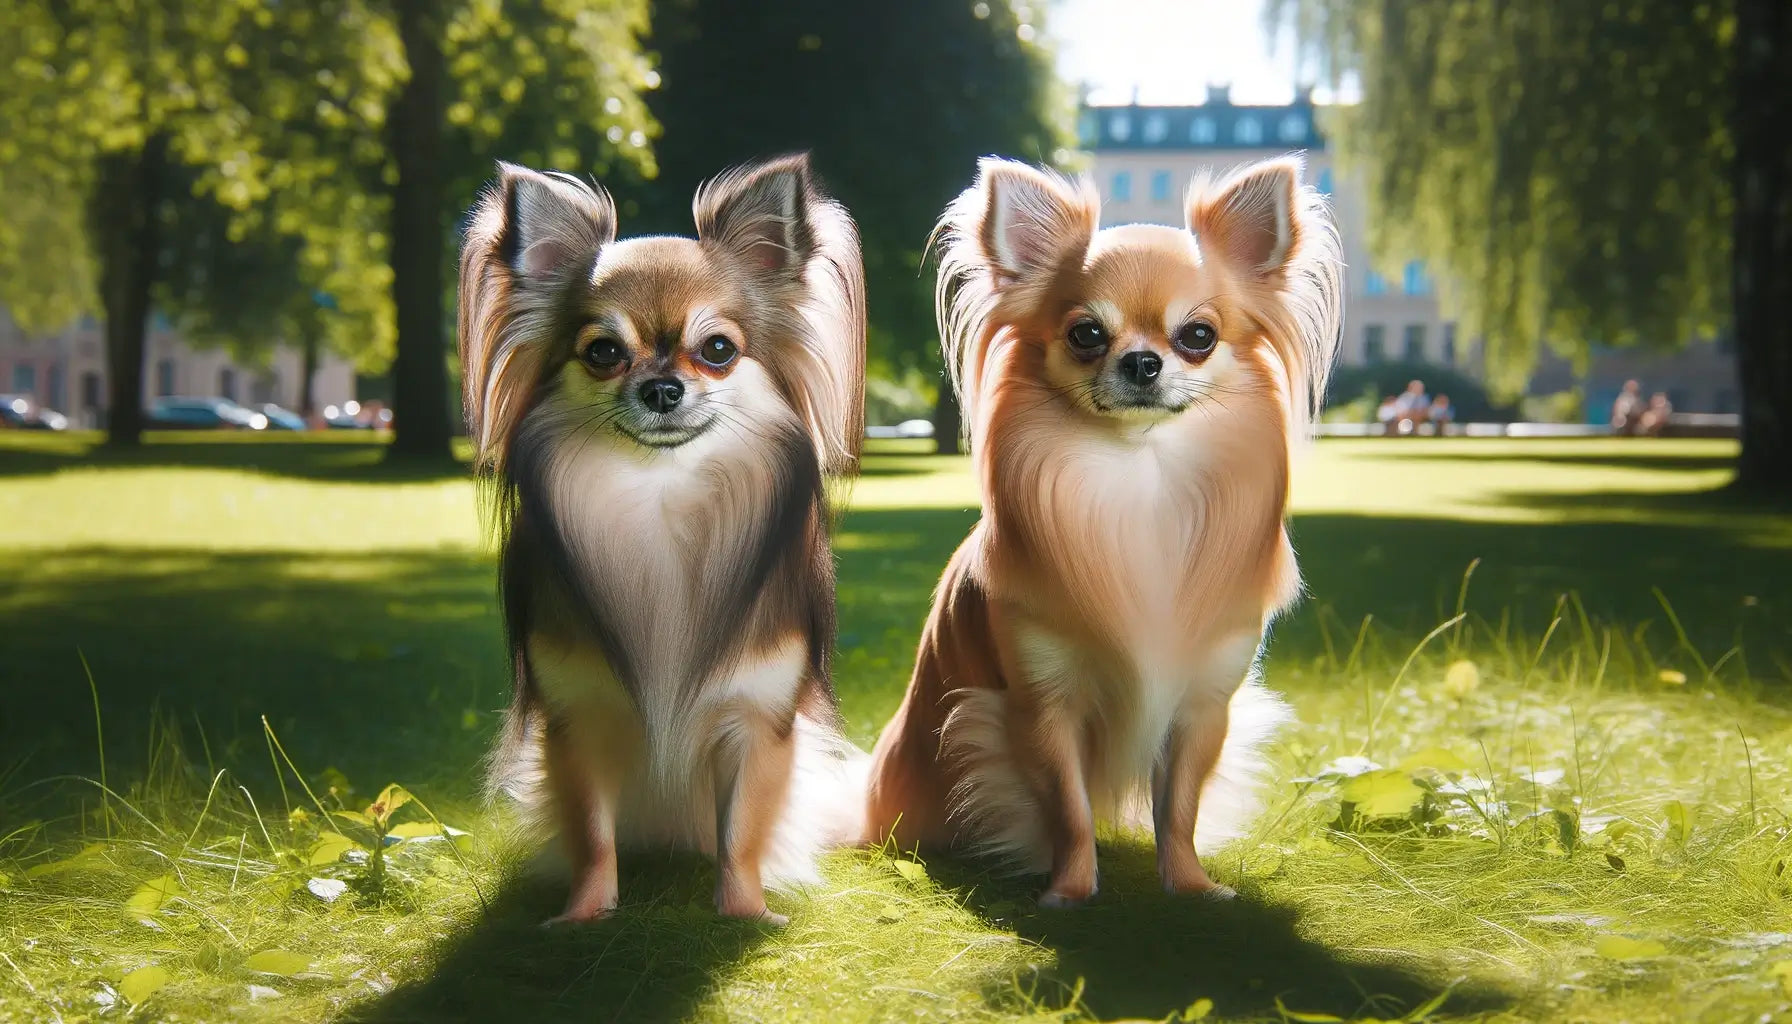 Long-Haired Chihuahuas with a male and female dog standing side by side in a sunny park.